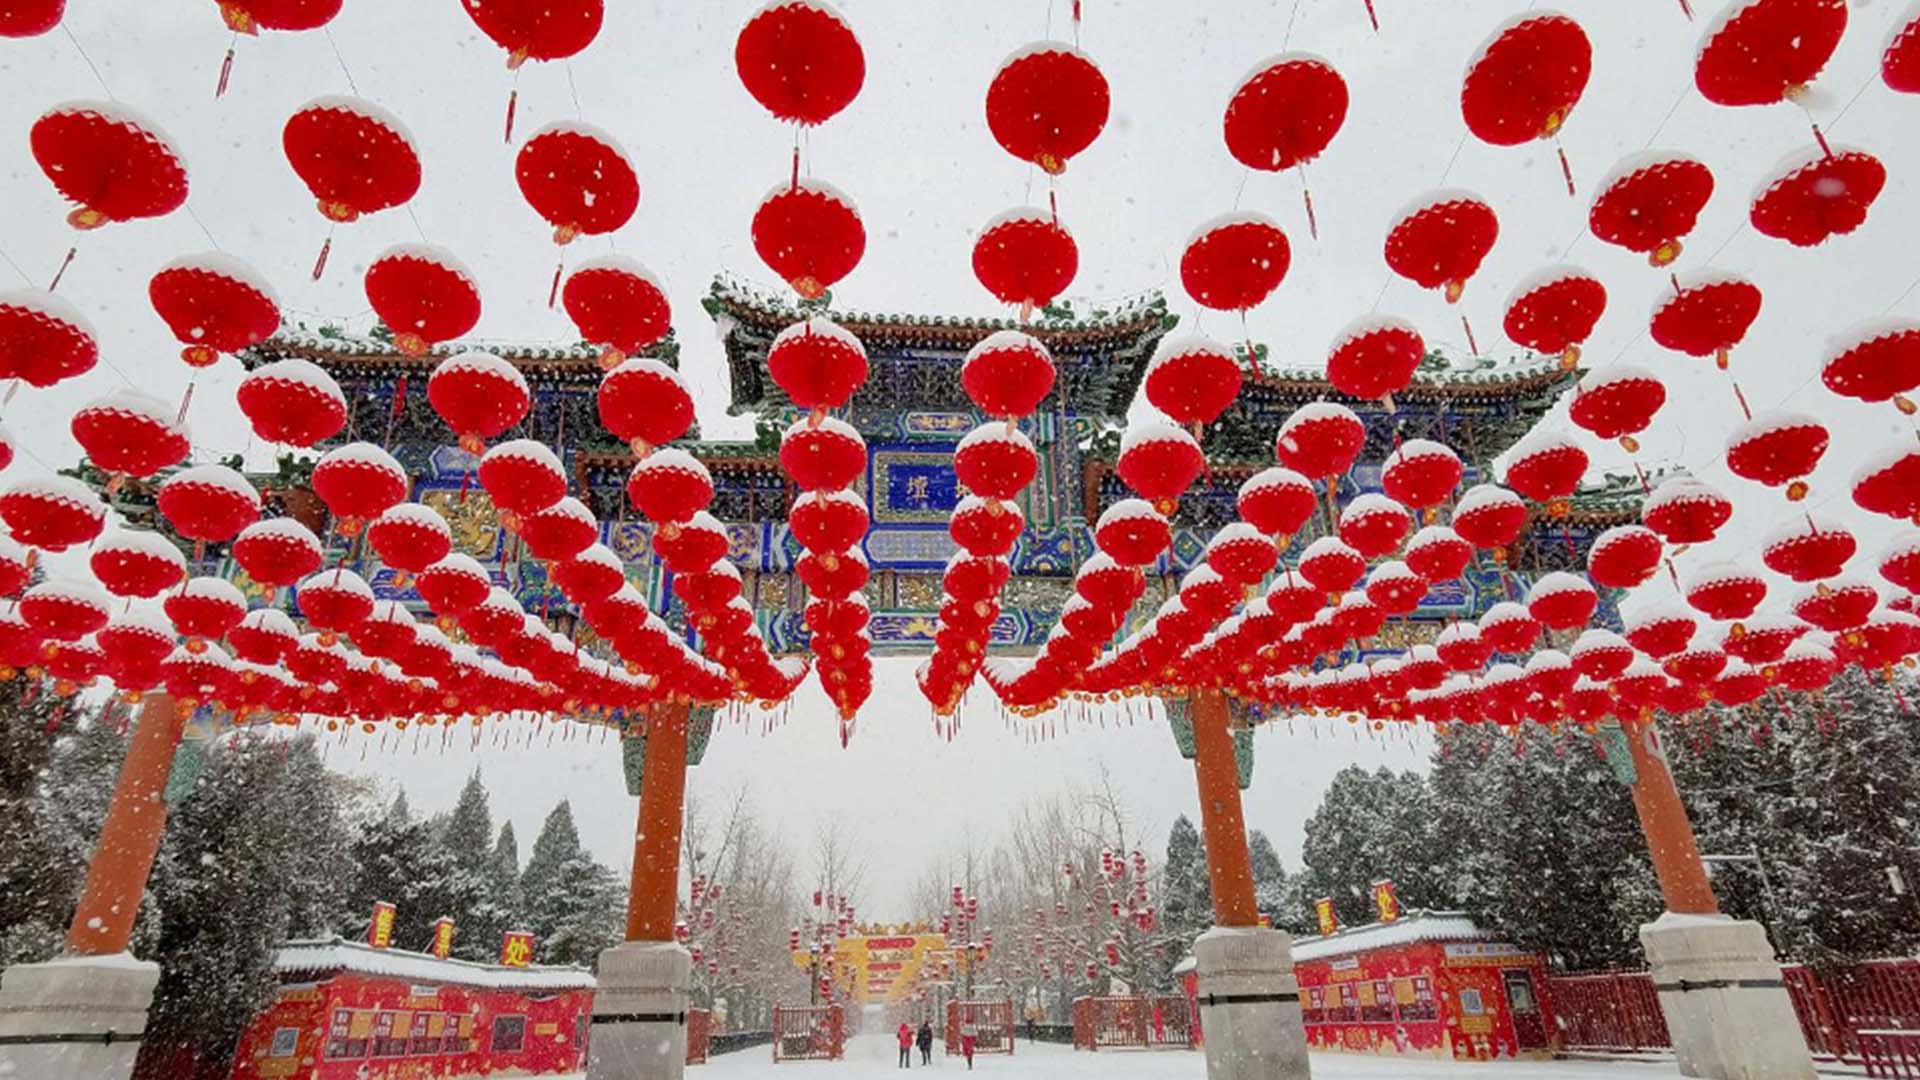 8 Lucky Ways to Celebrate Lunar New Year in the Workplace